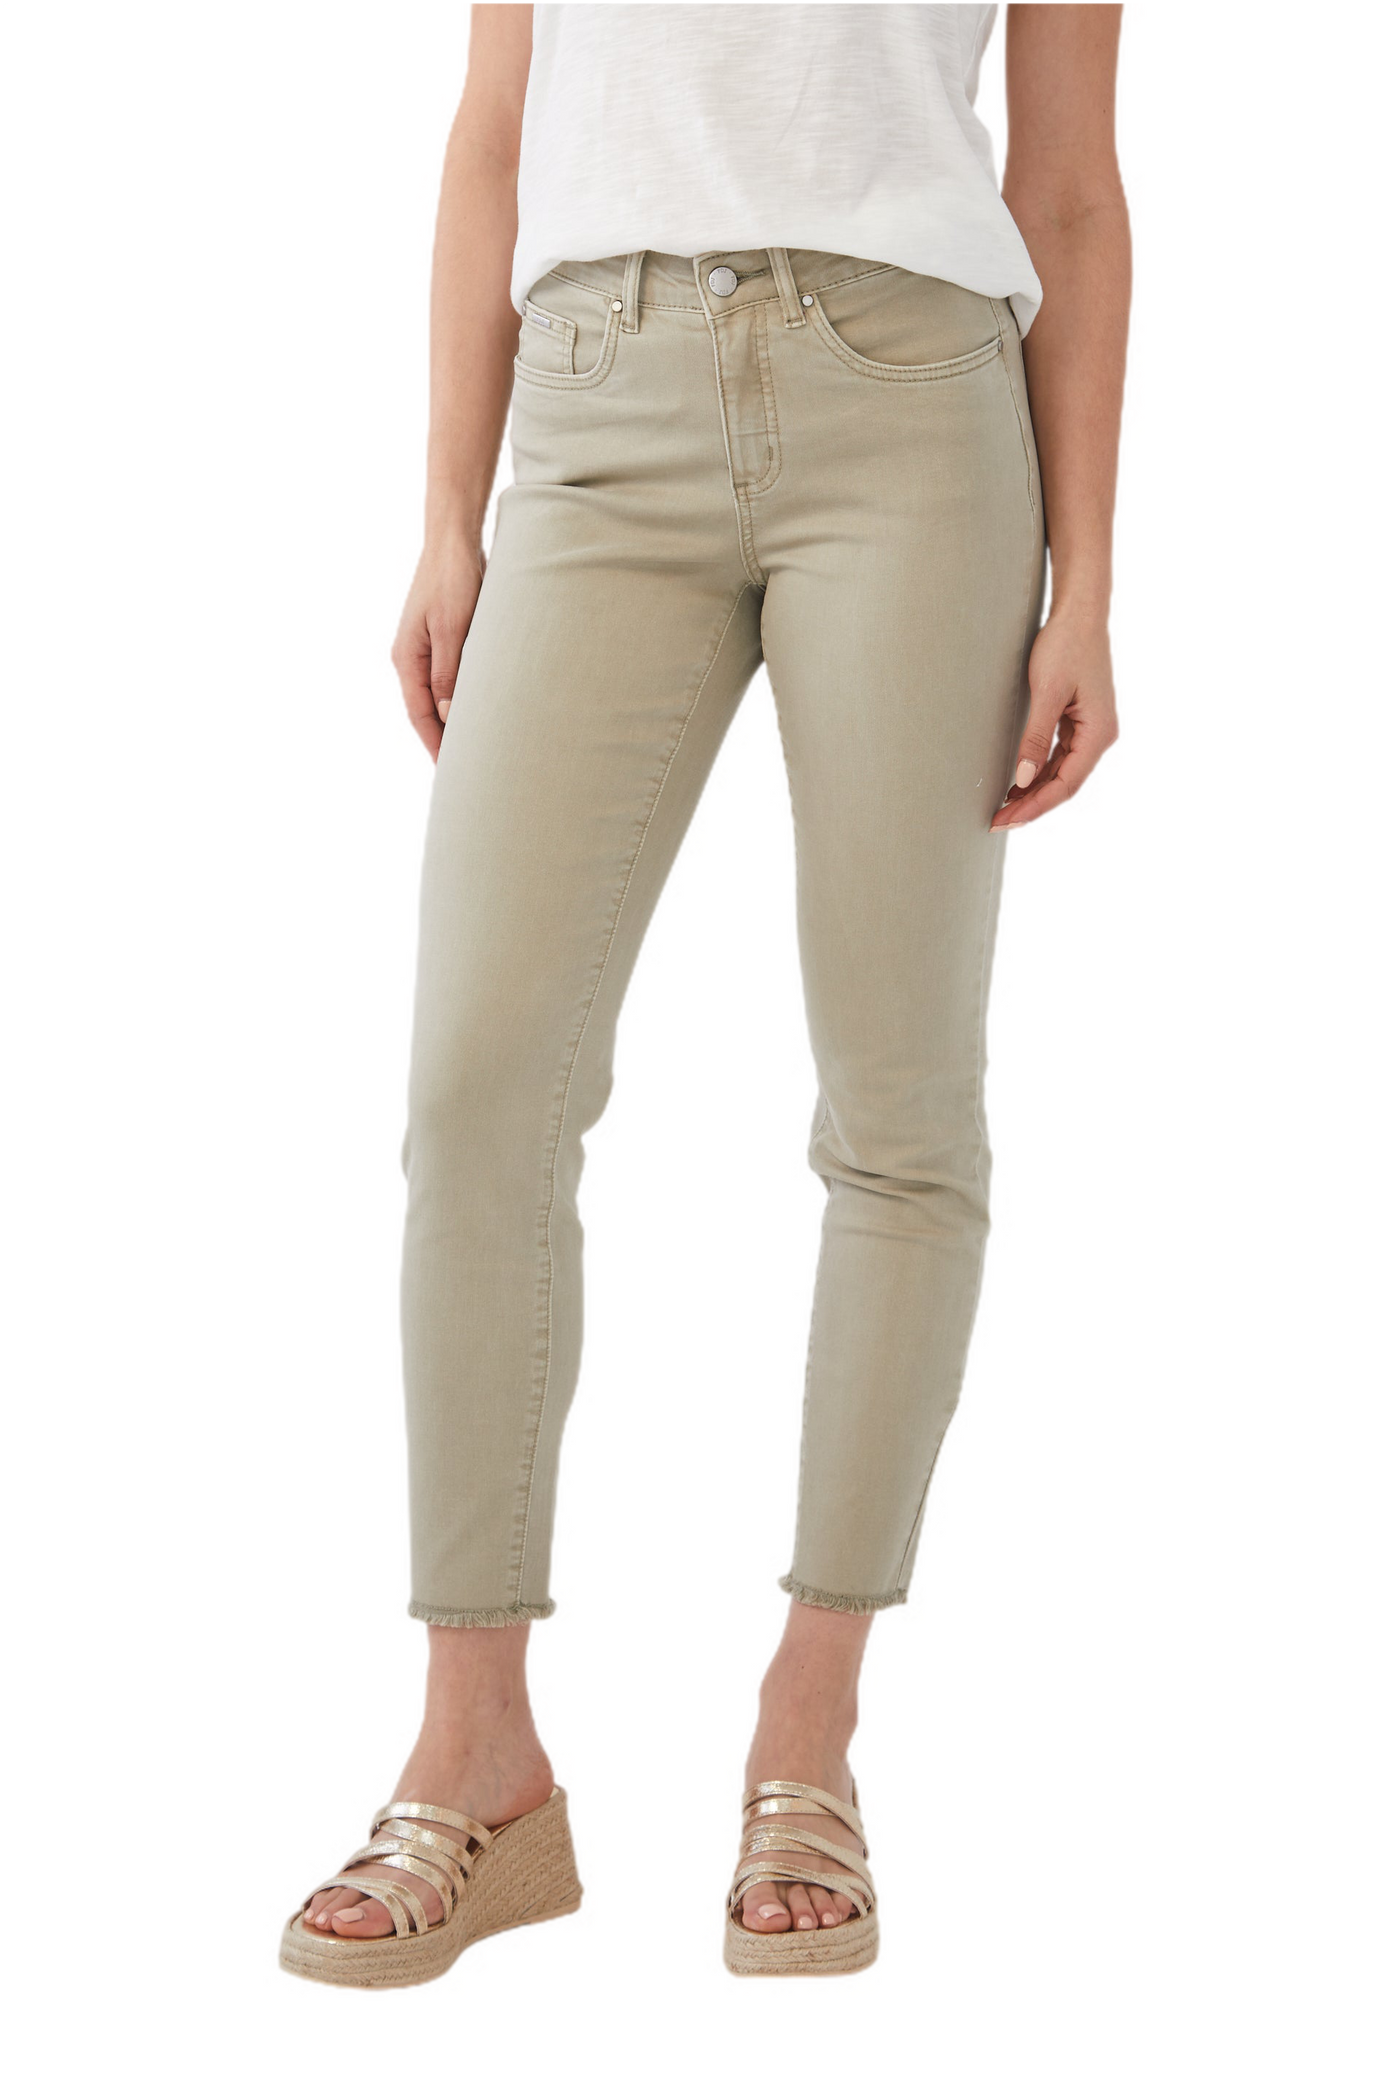 Olivia Slim Ankle in Euro Twill French Dressing Jeans